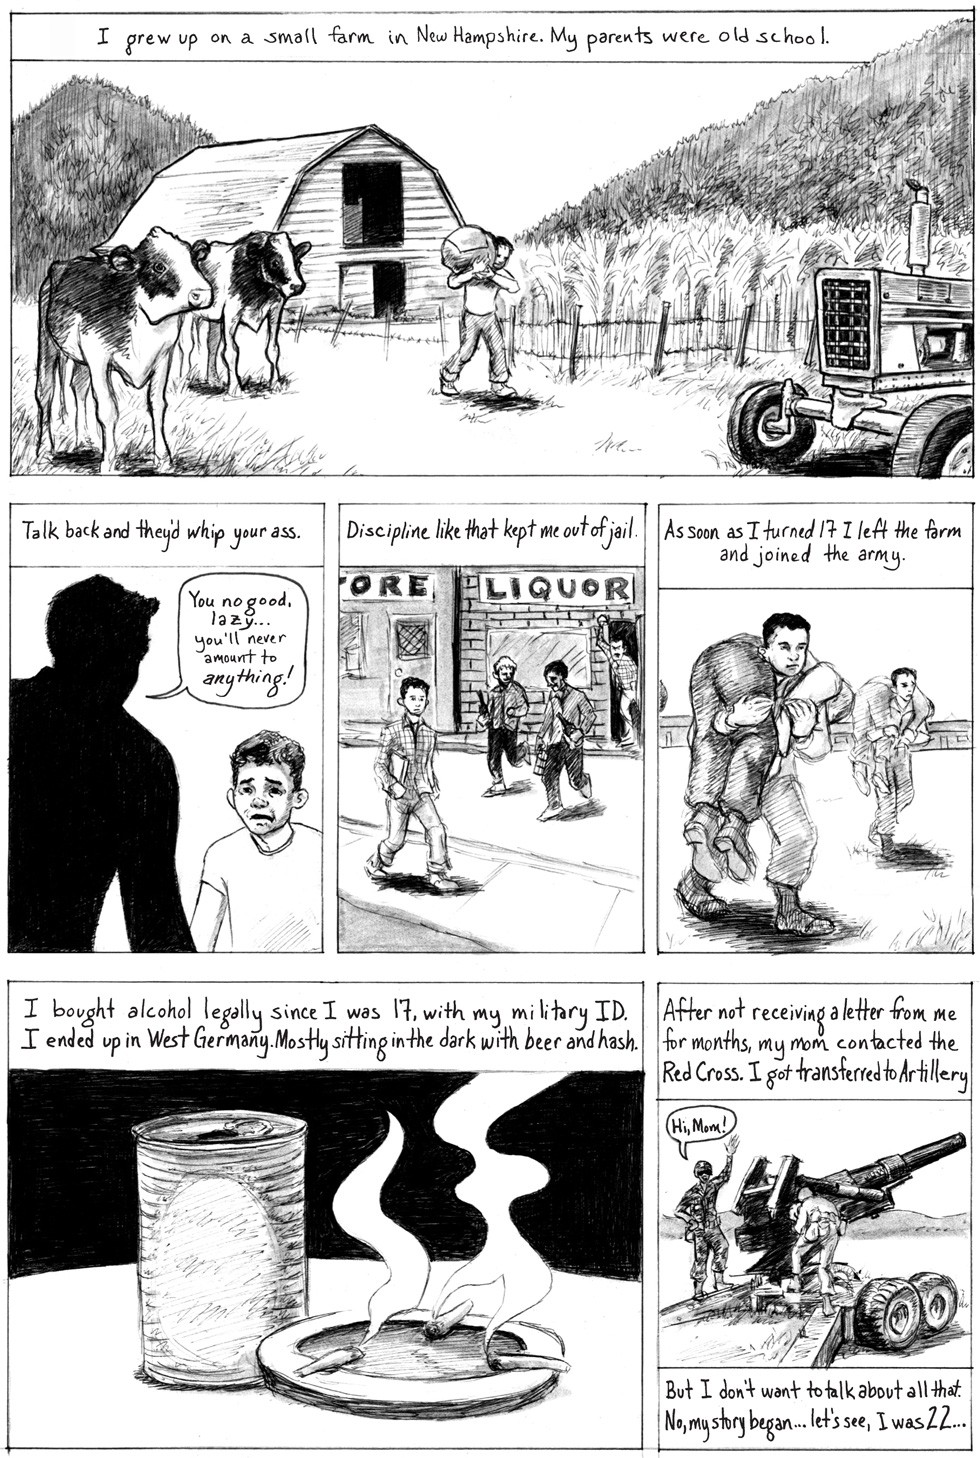 Excerpted from Kelly Swann and J.D. Lunt's comic